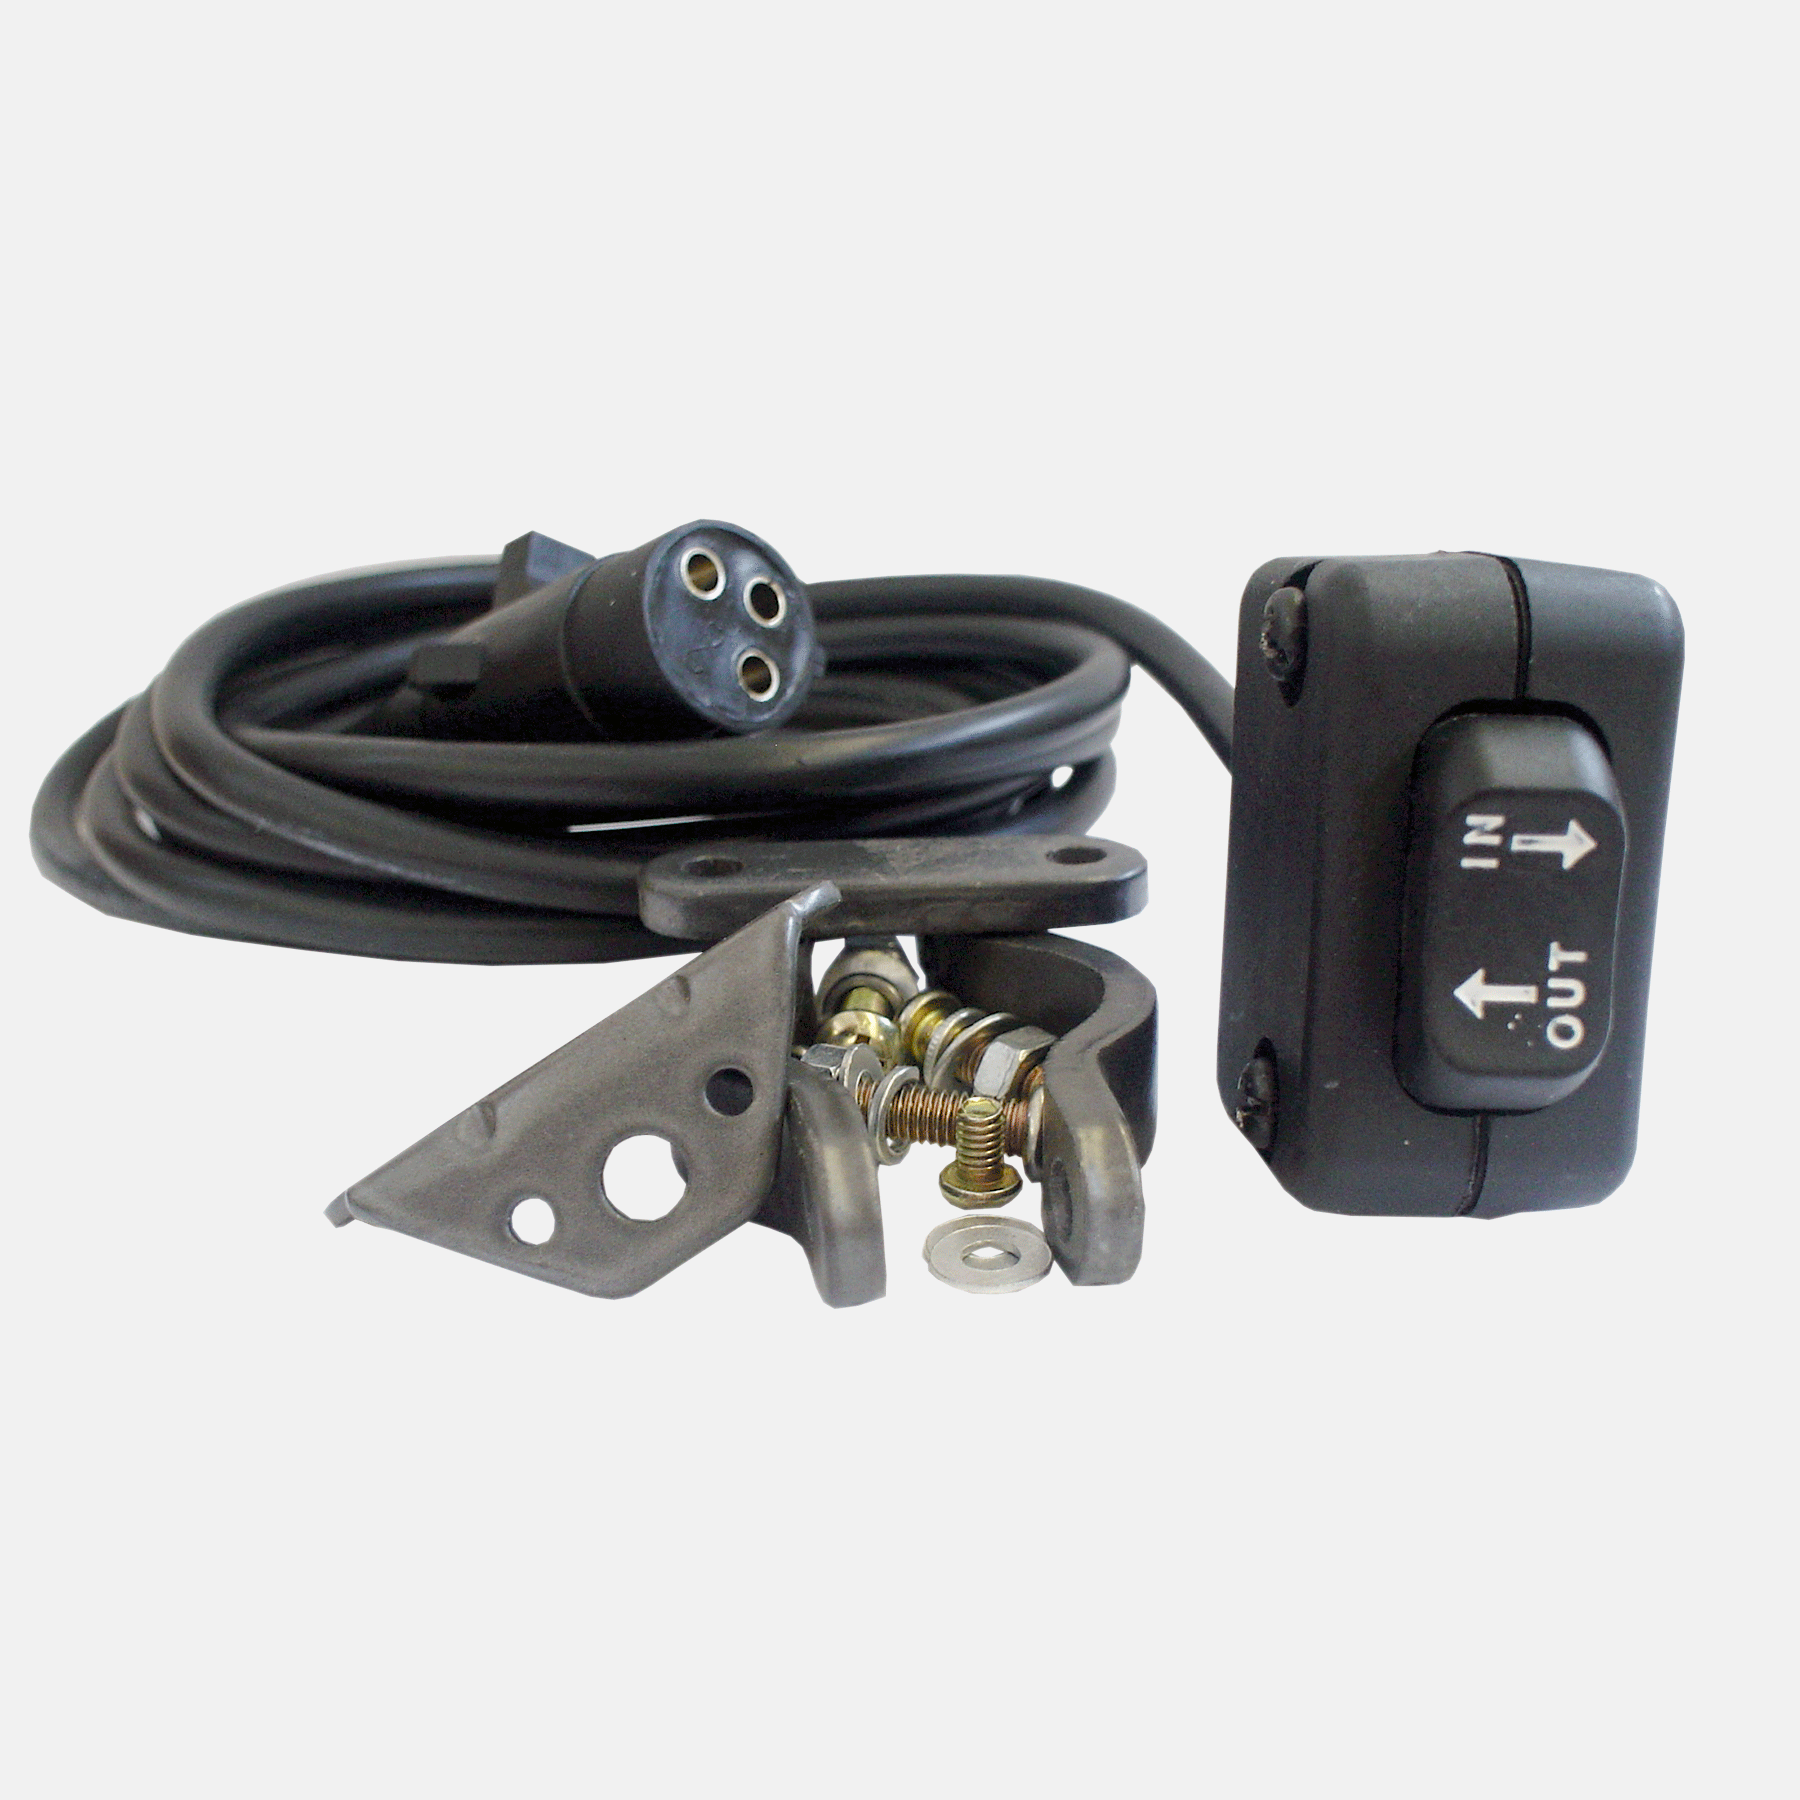 Winch remote control for ATV with cable series 2000-4000